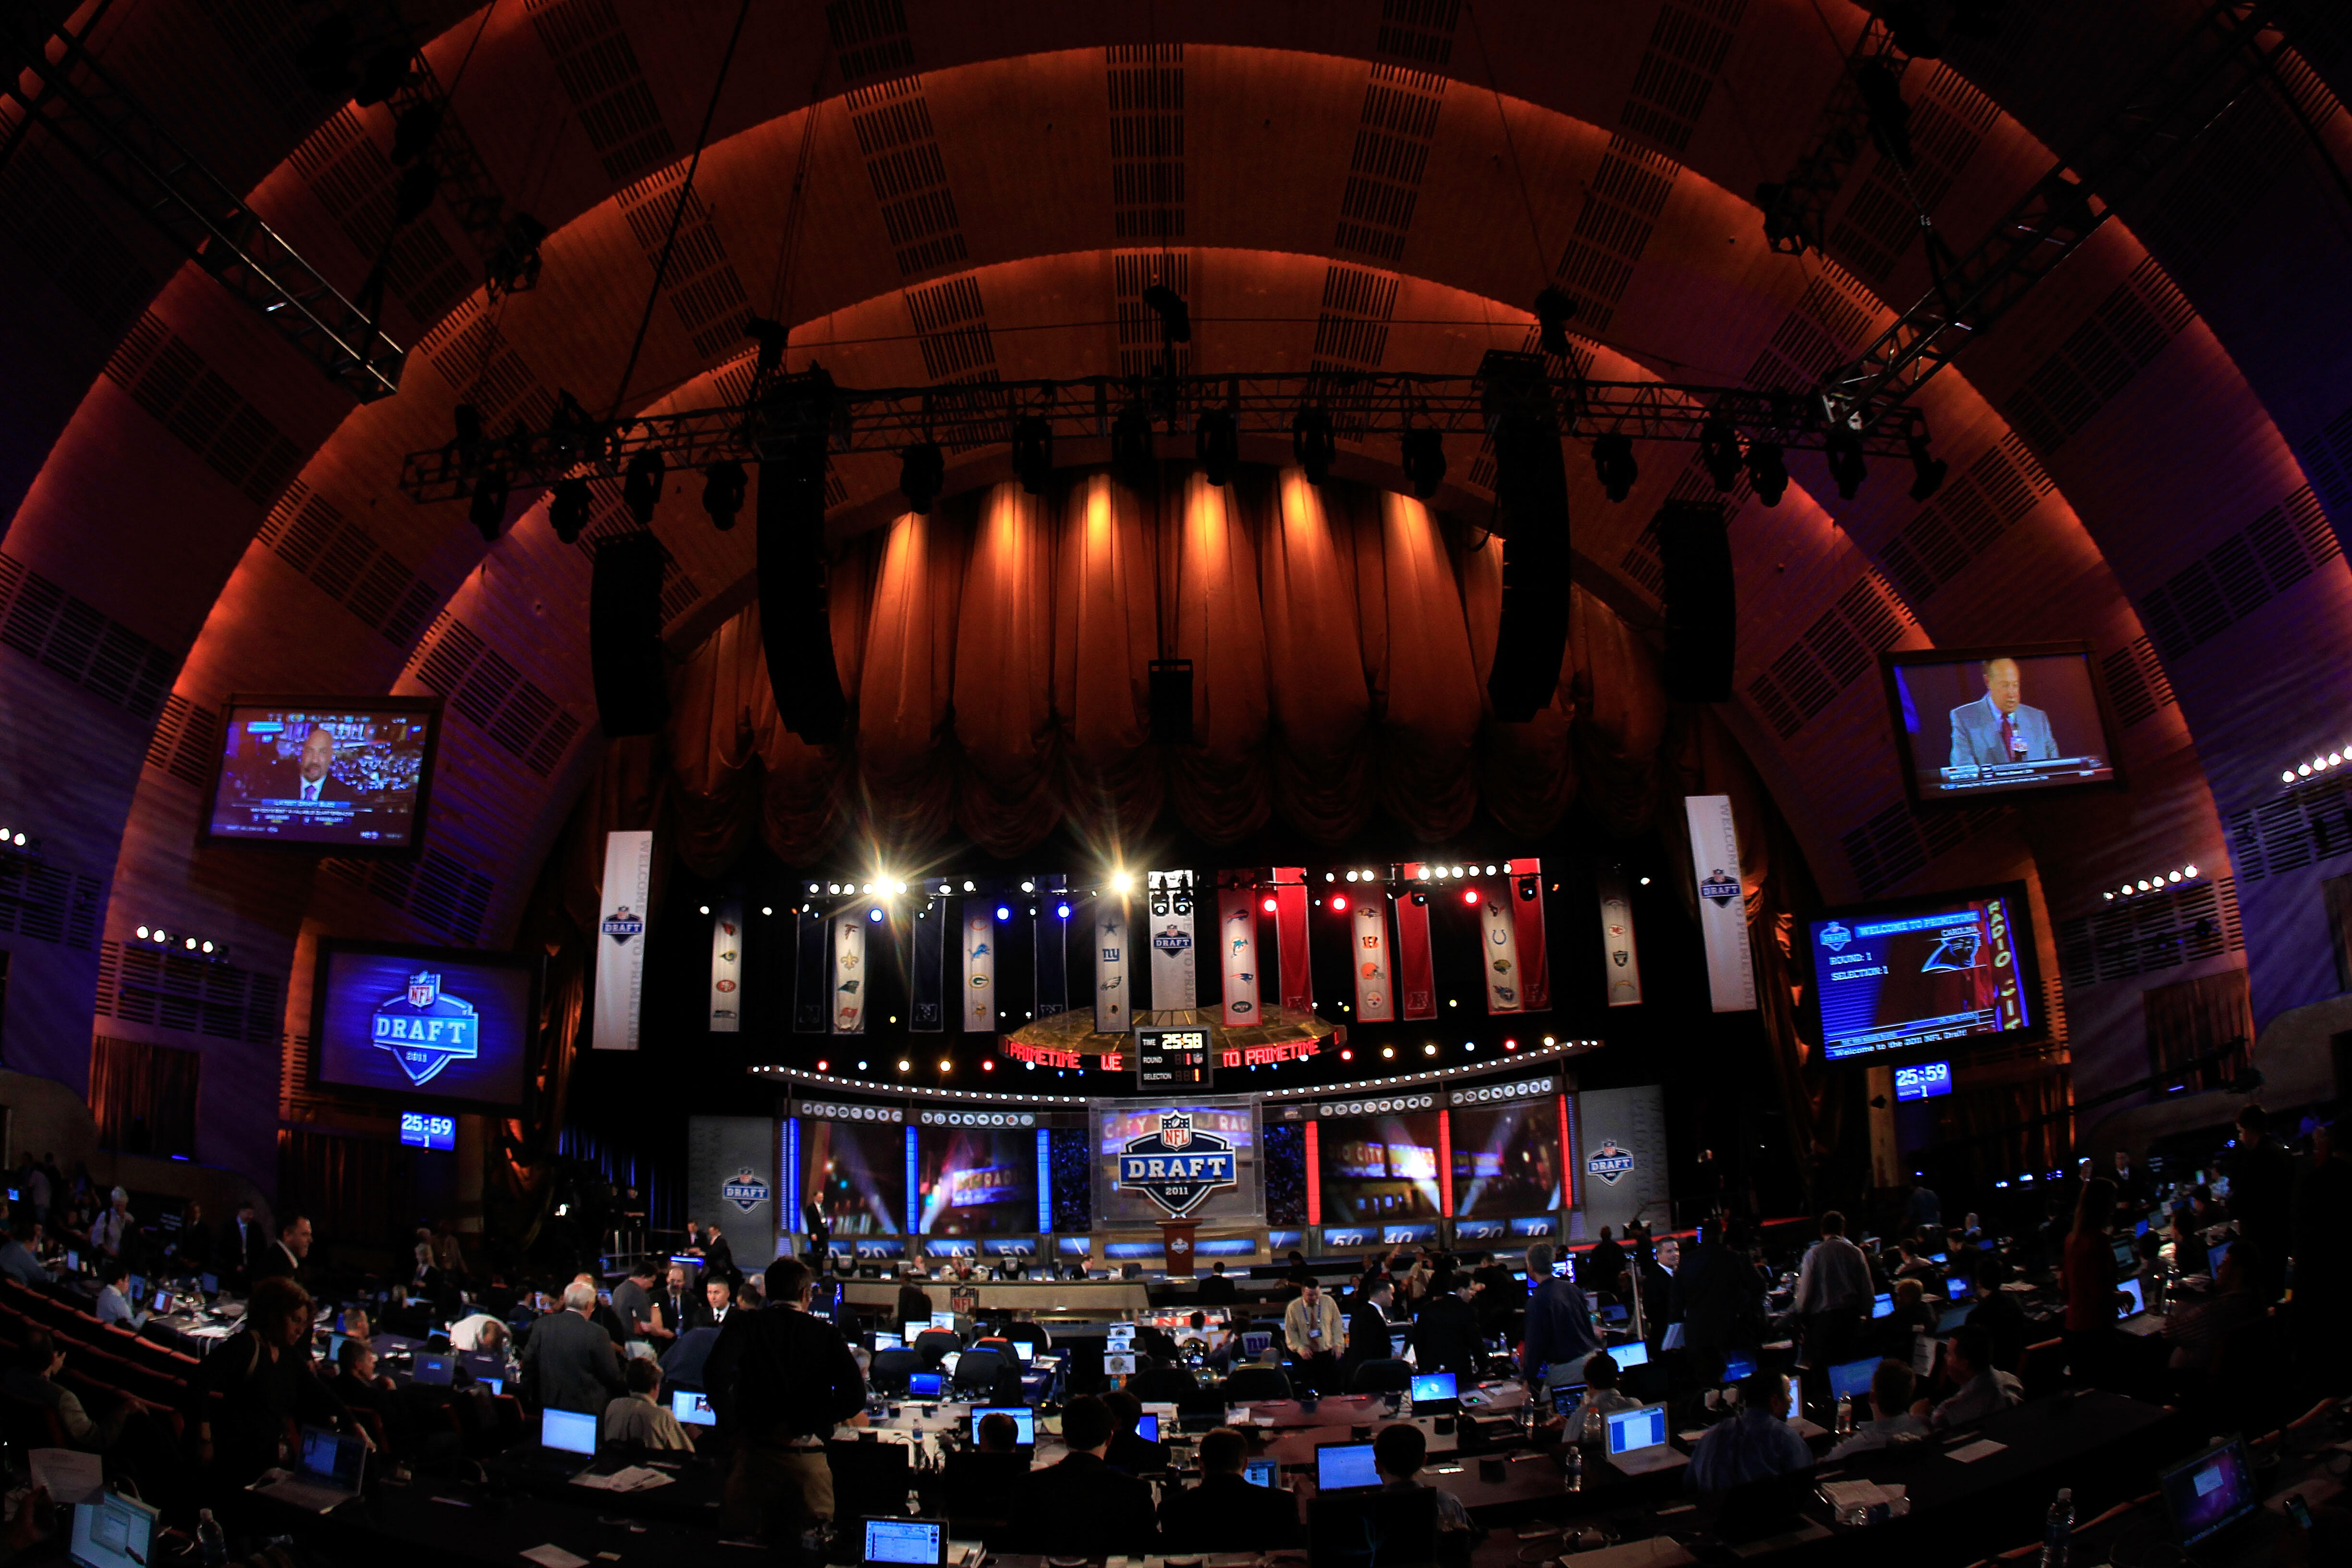 NEW YORK, NY - APRIL 28:  A general view of the Draft stage during the 2011 NFL Draft at Radio City Music Hall on April 28, 2011 in New York City.  (Photo by Chris Trotman/Getty Images)